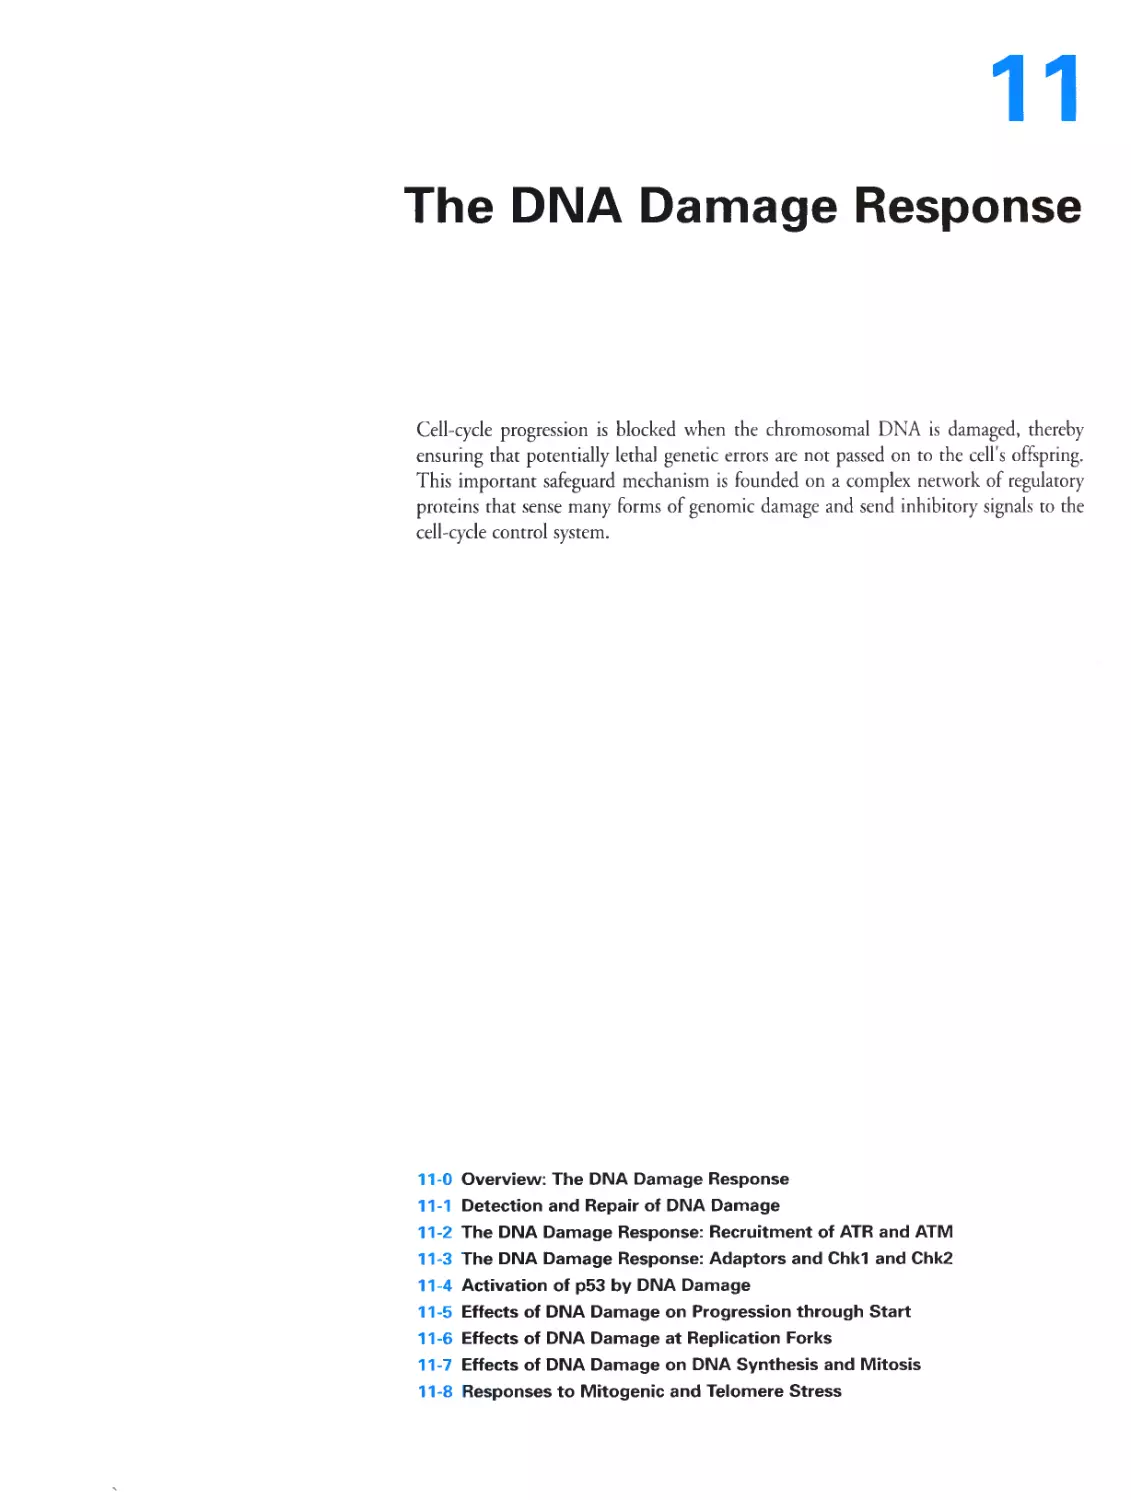 Chapter 11. The DNA Damage Response